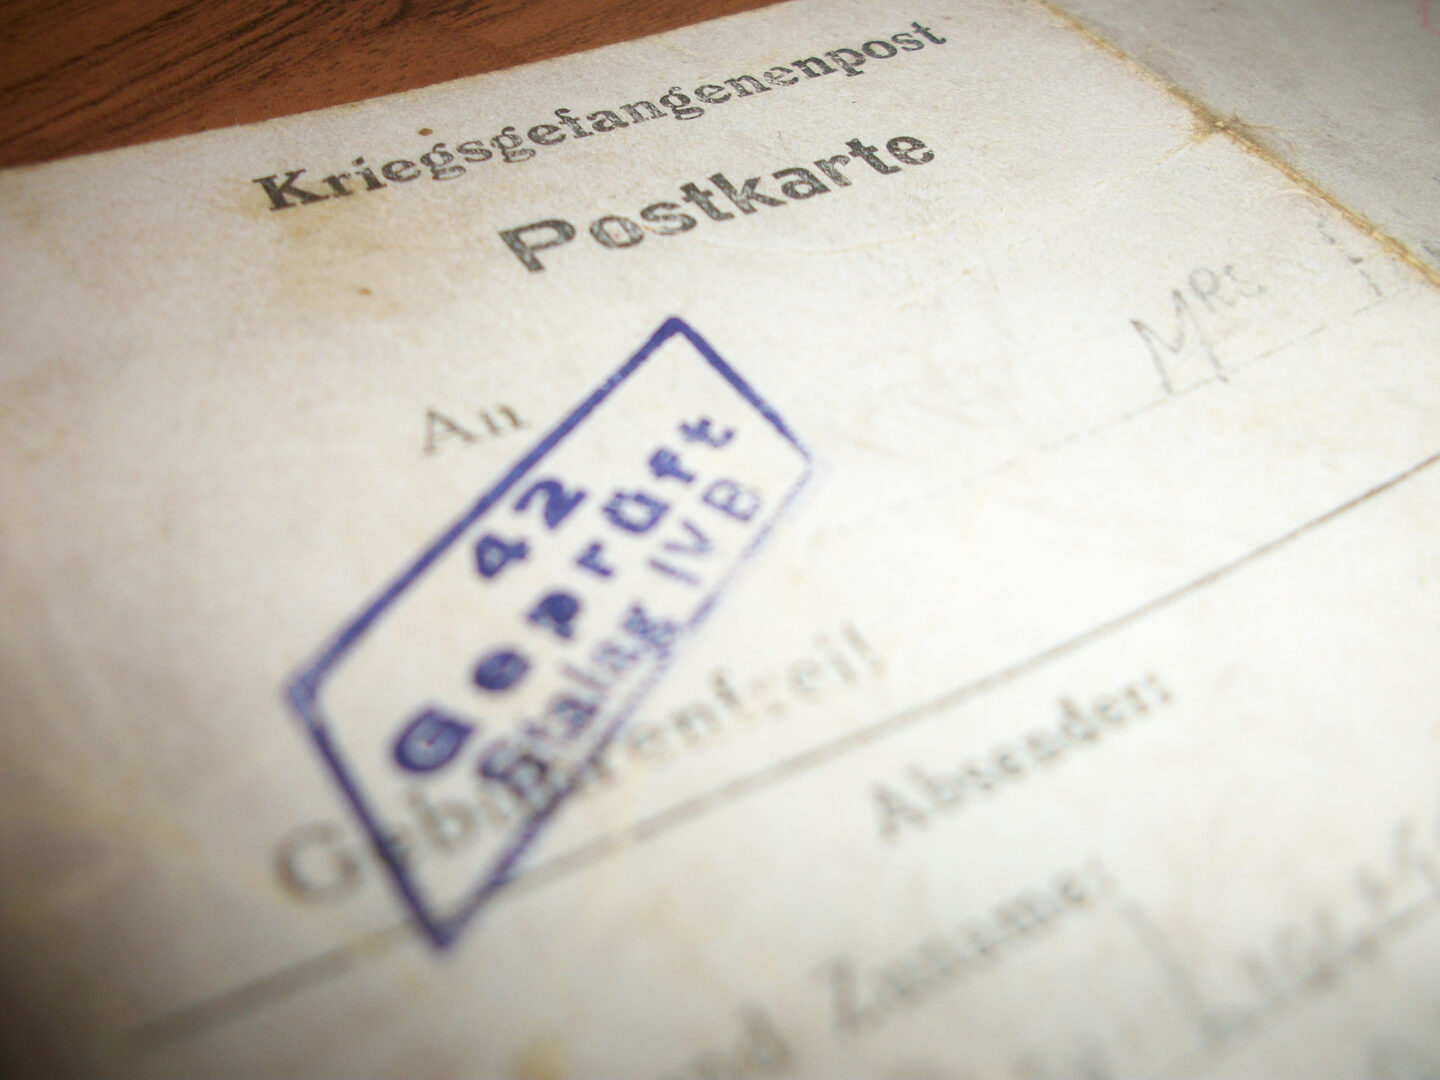 A postcard written from P.O.W. Camp Stalag IVB, Muhlberg, Germany from Sergeant Alexander Liggett to his wife Kathleen in Portadown, Co. Armagh.